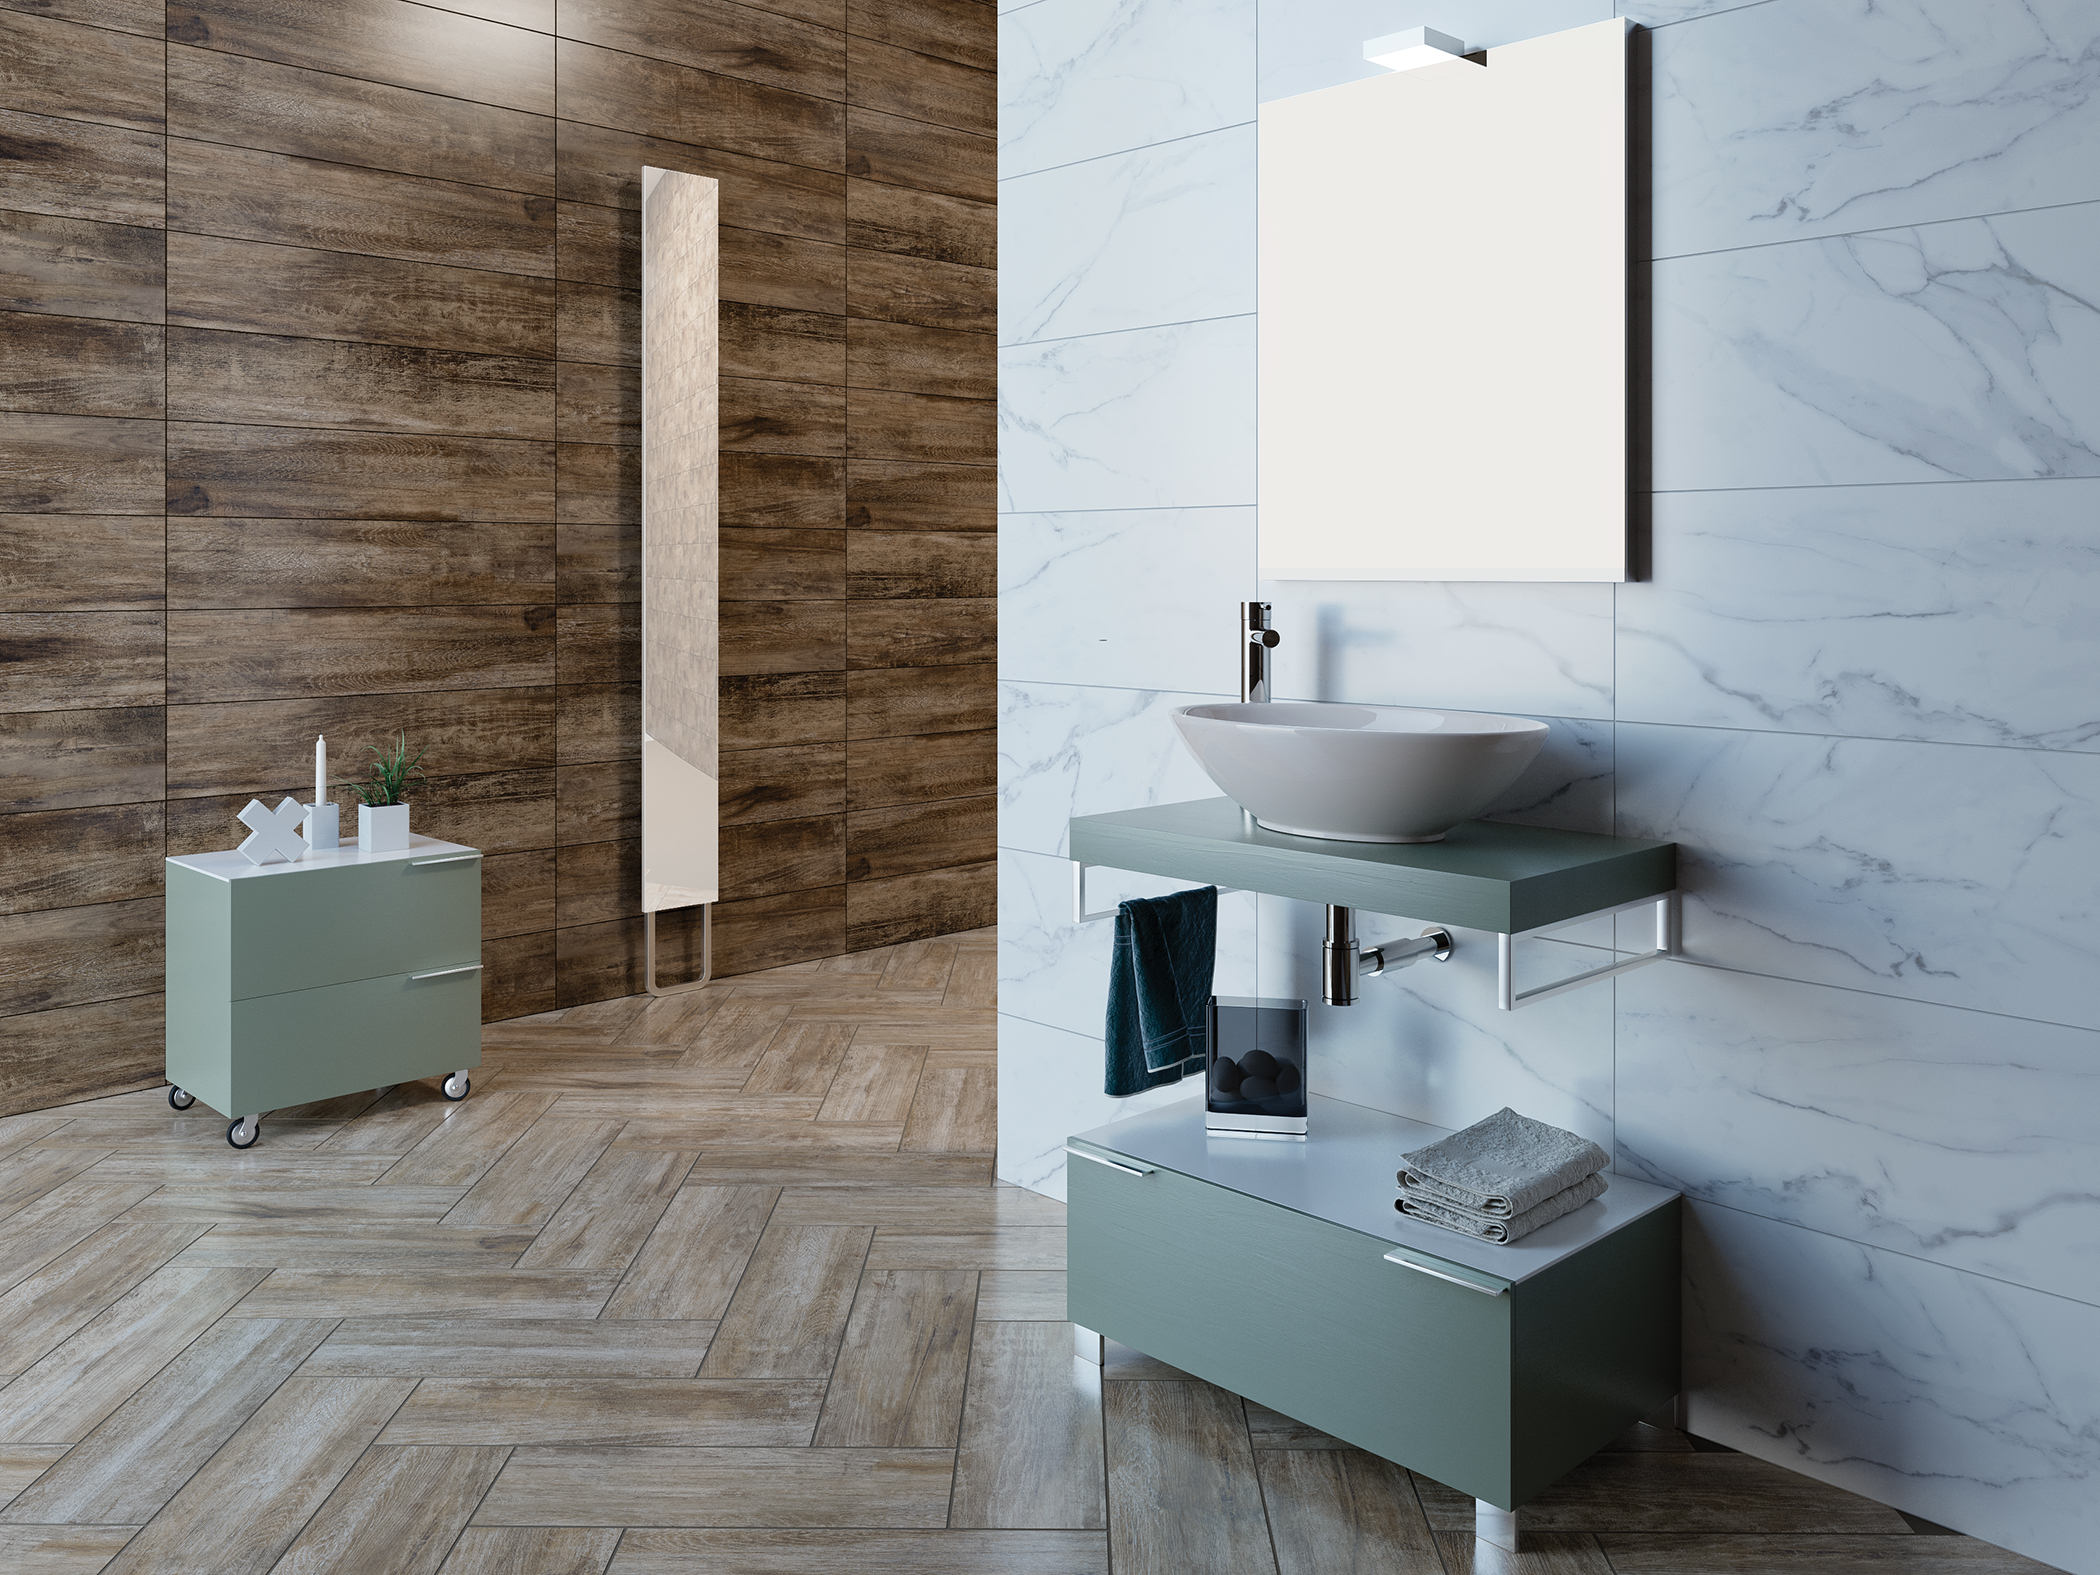 Bring nature's beauty indoors with the new Ekabawood series from Trends in Ceramic!